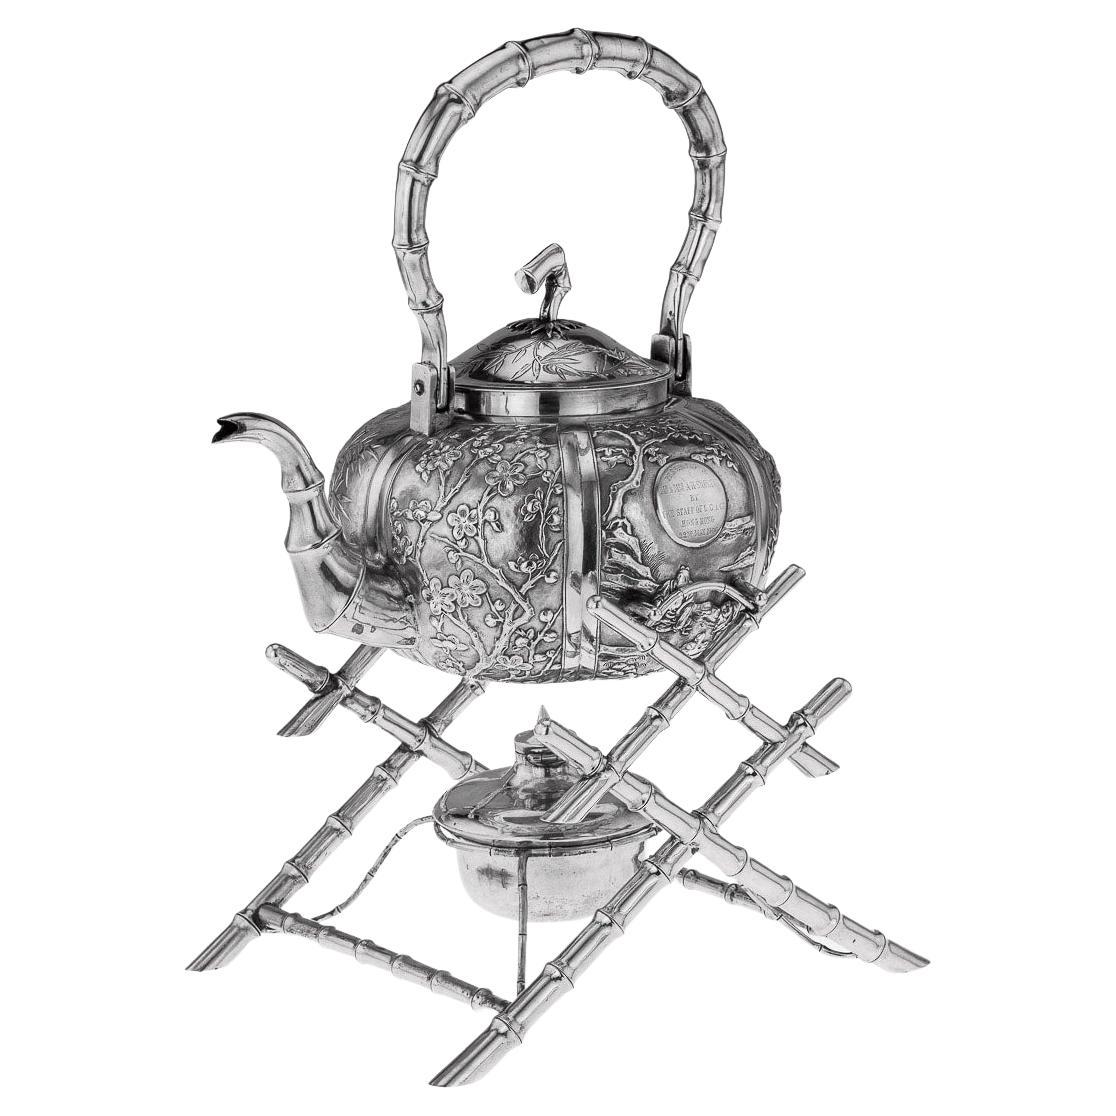 20th Century Chinese Export Solid Silver Kettle On Stand, Sun Shing, circa 1900